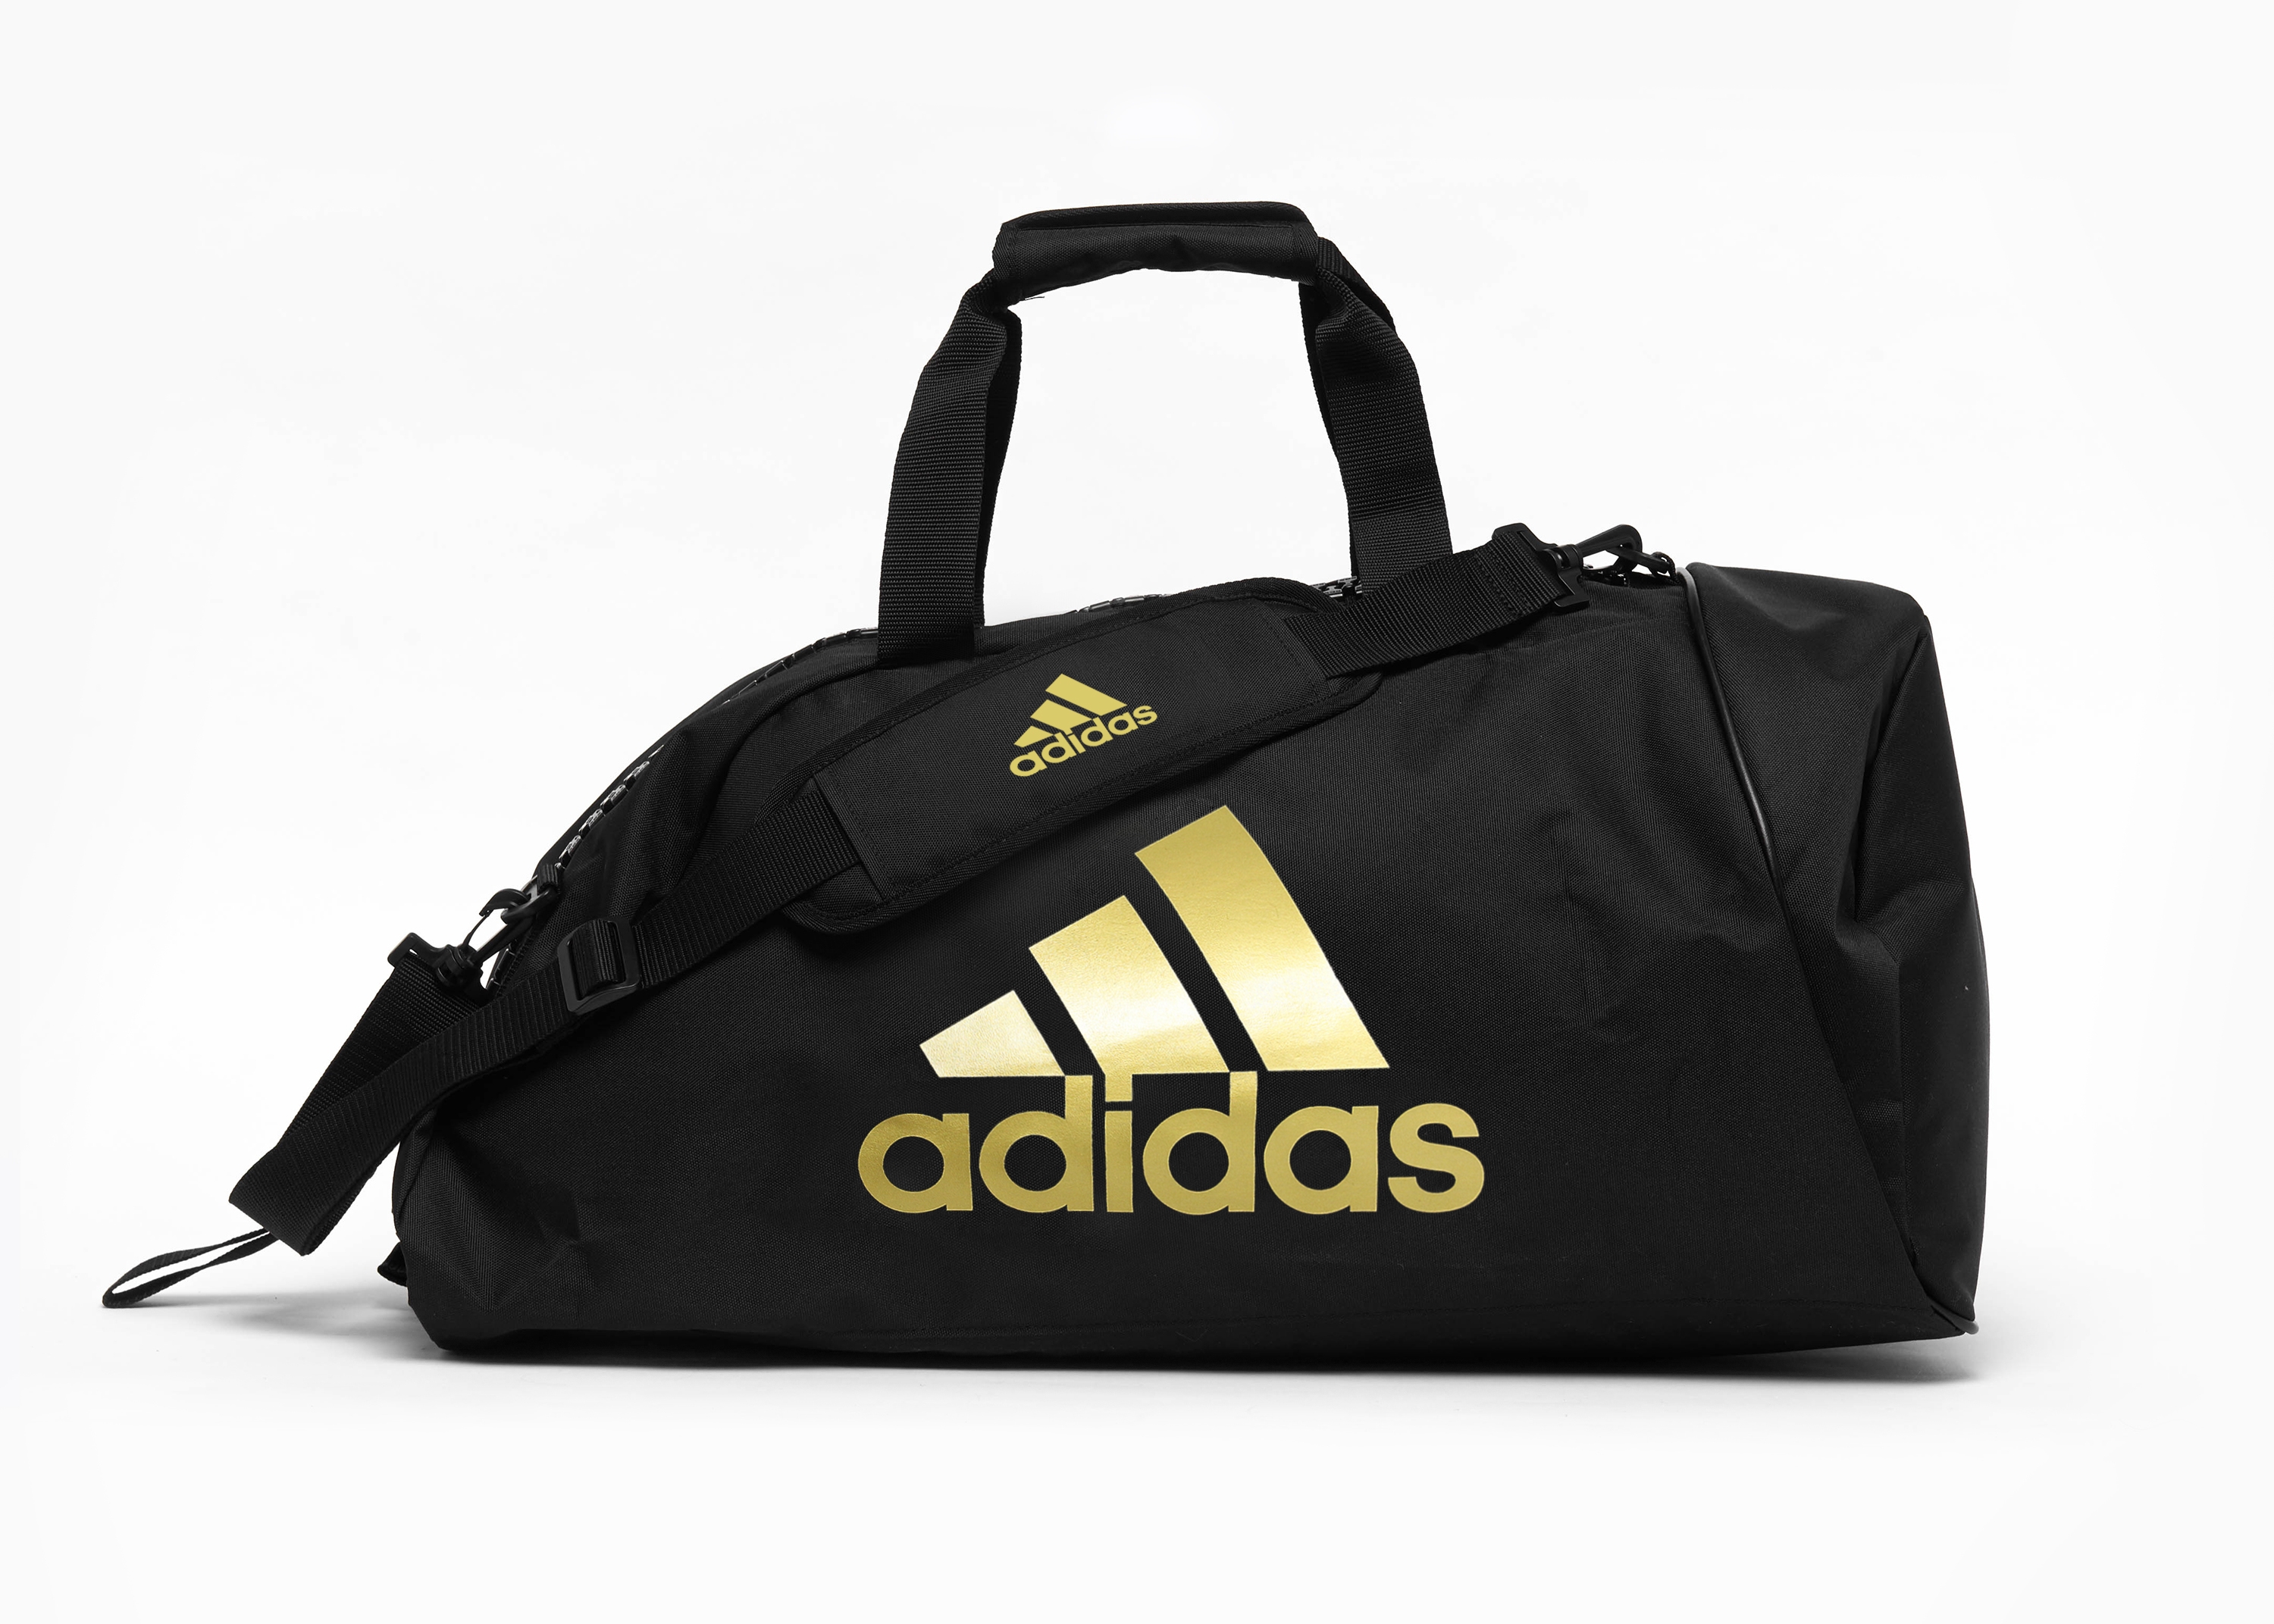 adidas 2in1 Bag Polyester COMBAT SPORTS black/gold M